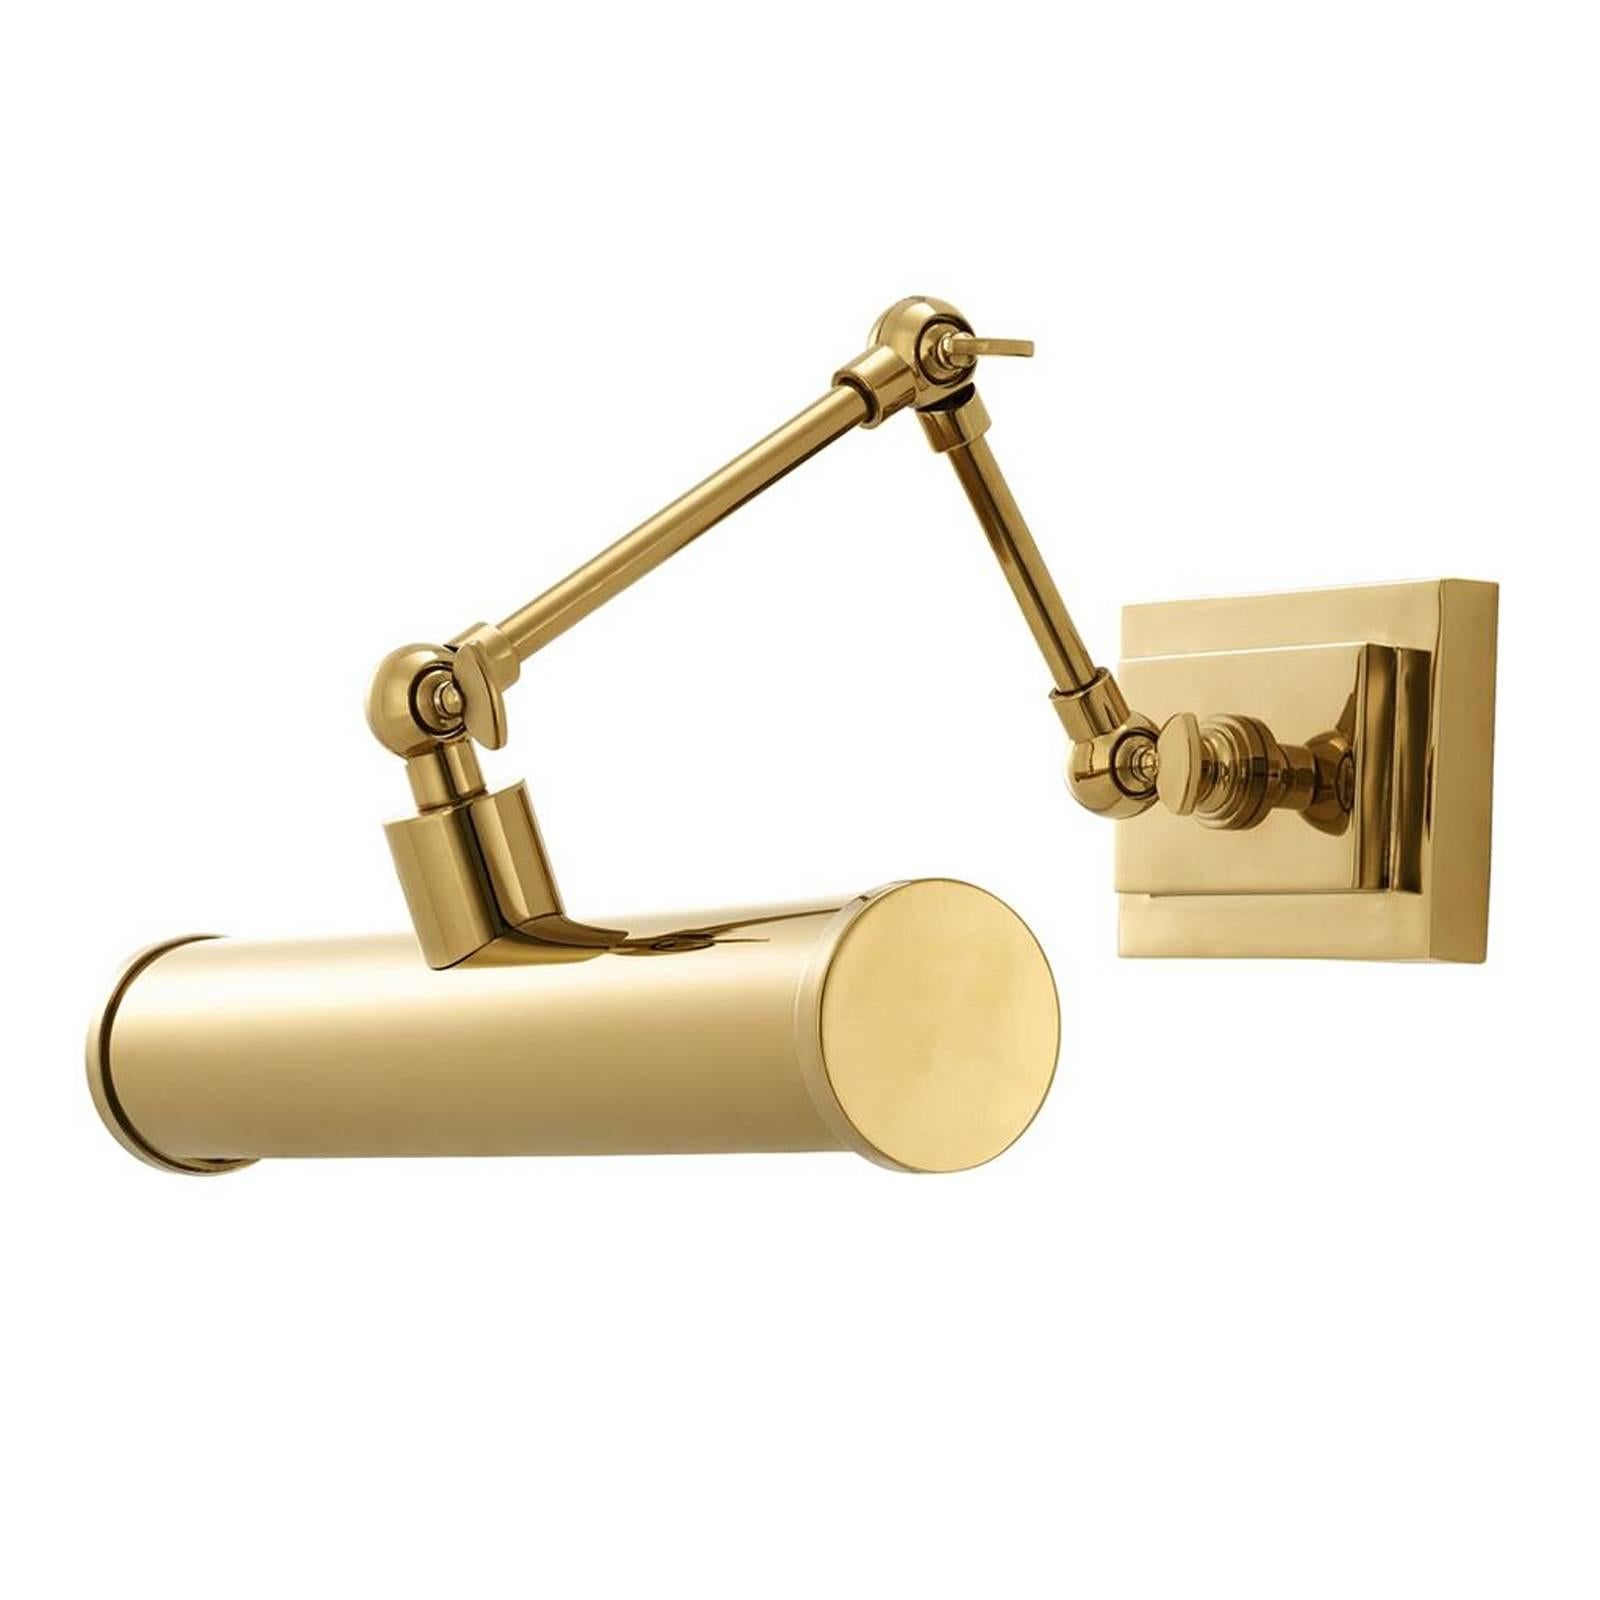 Wall lamp Dayton with structure in gold finish.
Adjustable arm. Two bulbs, lamp holder type E14,
max 40 watt. Bulbs not included.
Also available in nickel or bronze finish.

 